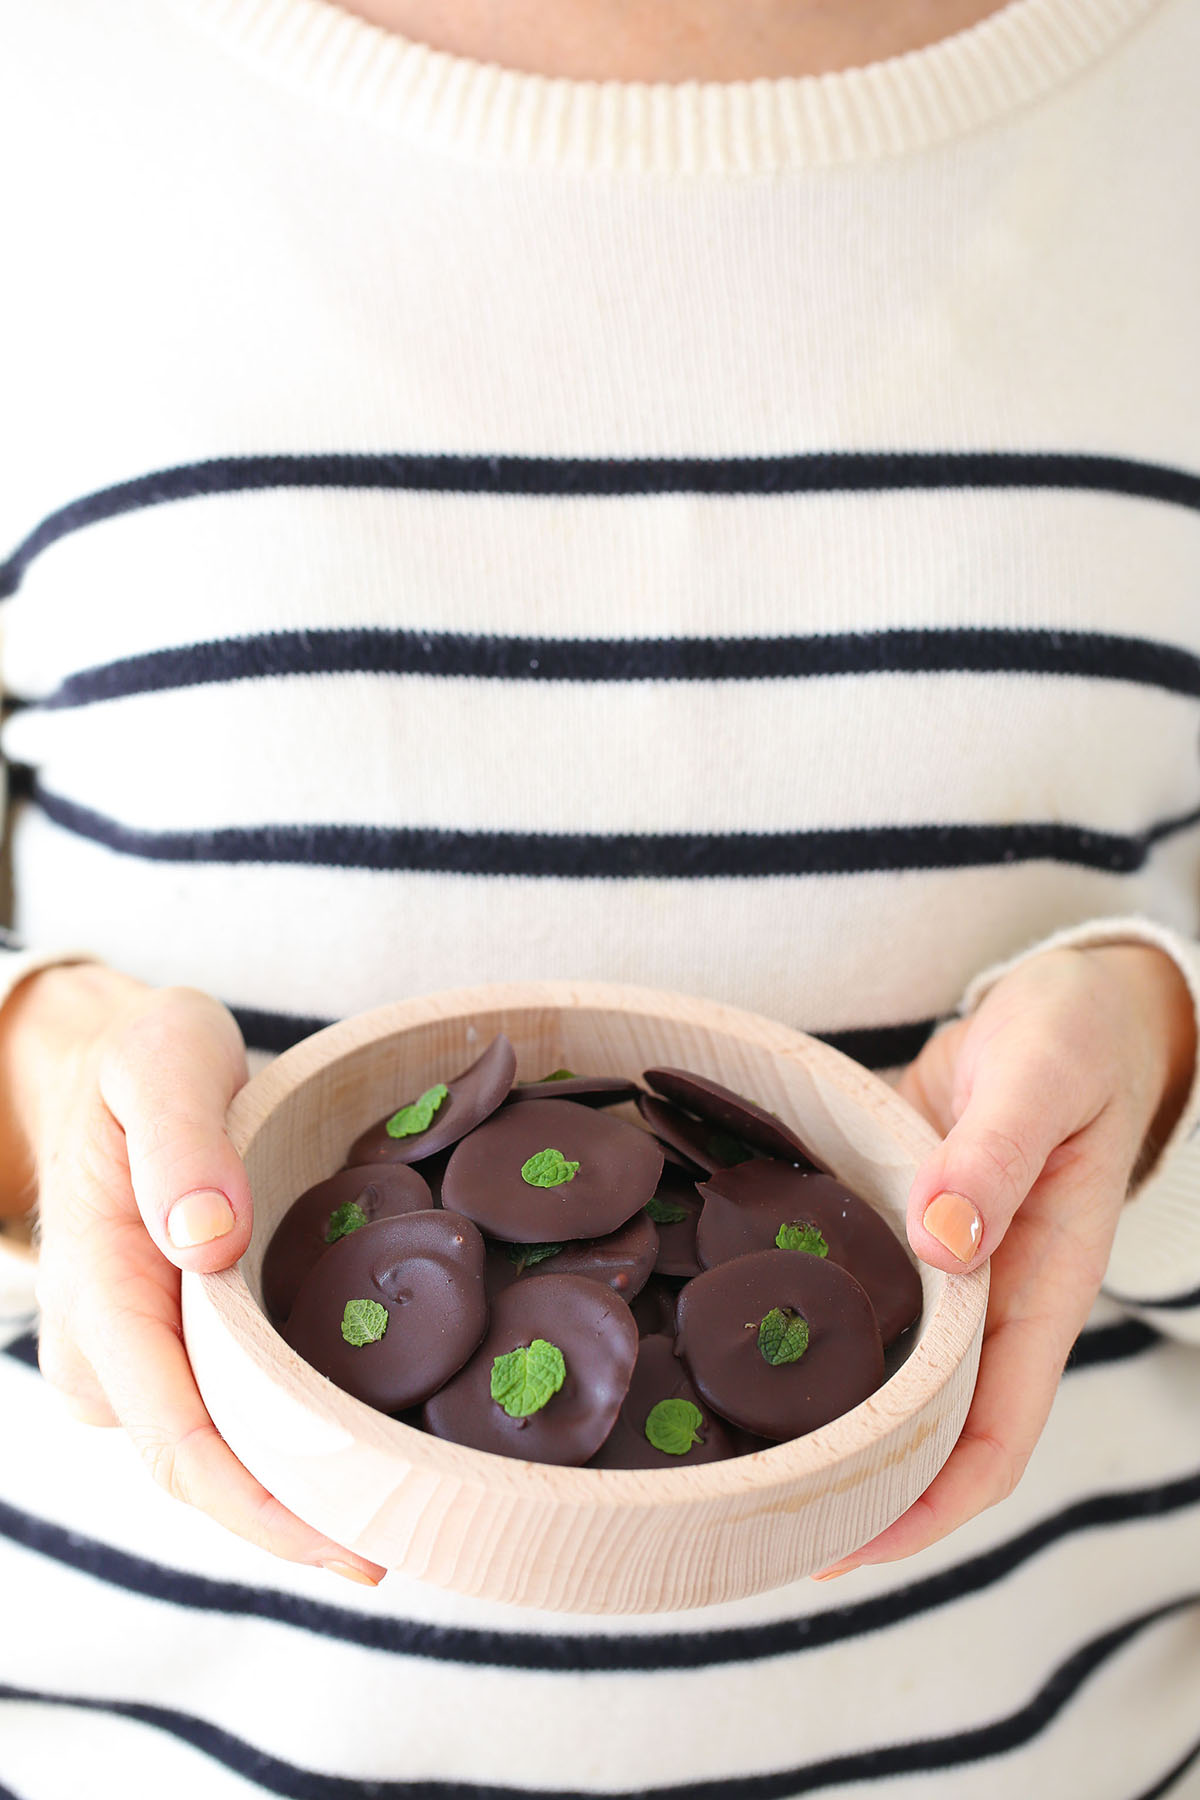 Chocolate mint buttons, these are drops of dark chocolate mint bliss. Made with just 2 ingredients - dark dairy free chocolate and pure peppermint essential oil, they’re vegan and low sugar too.